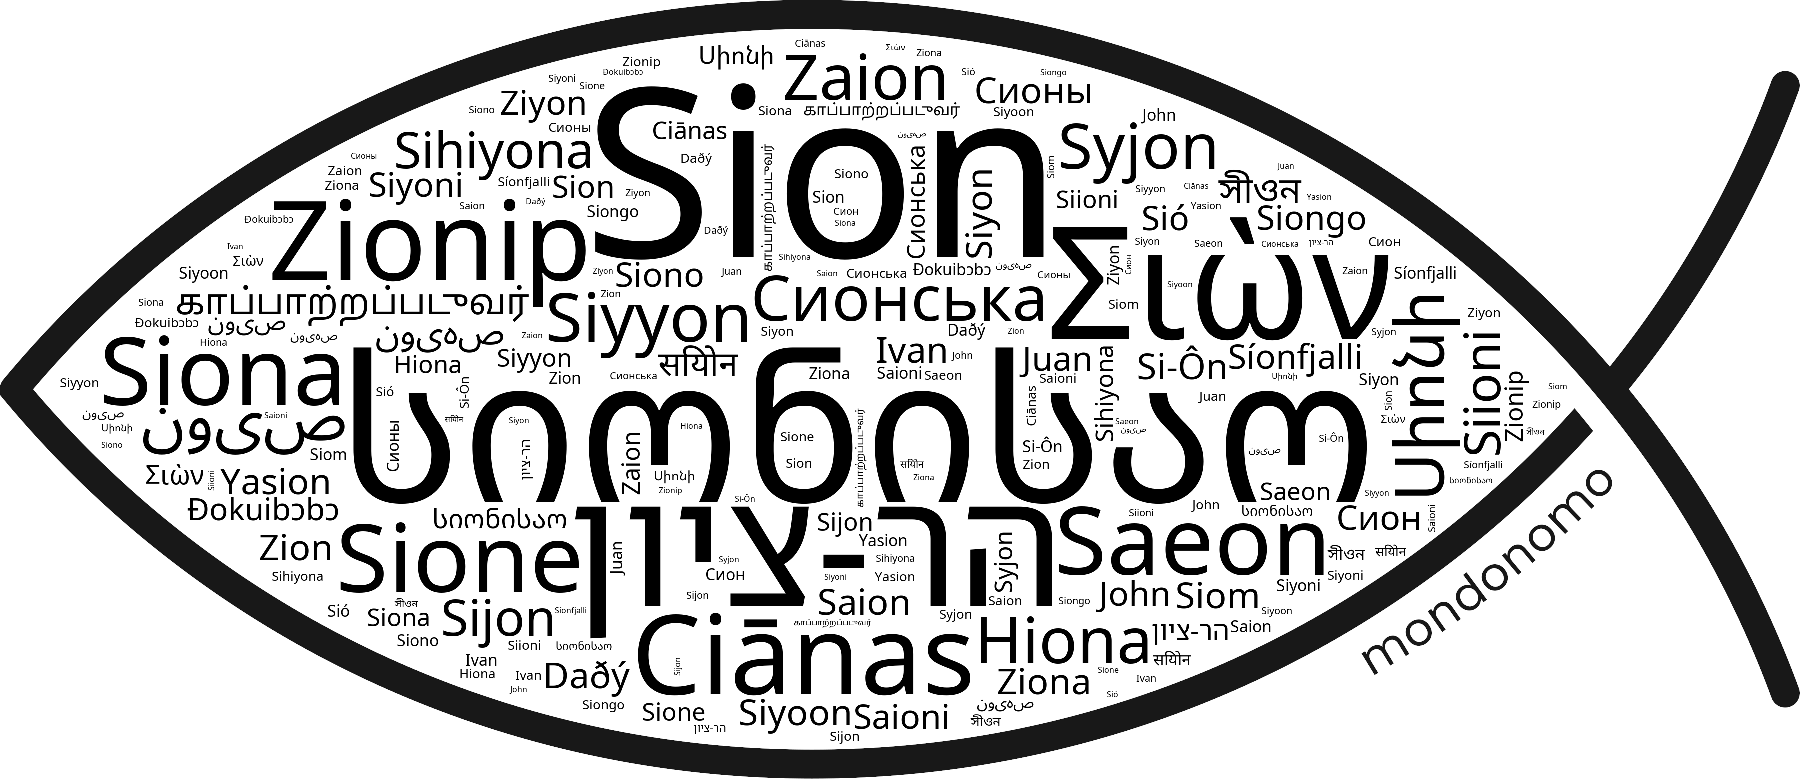 Name Sion in the world's Bibles